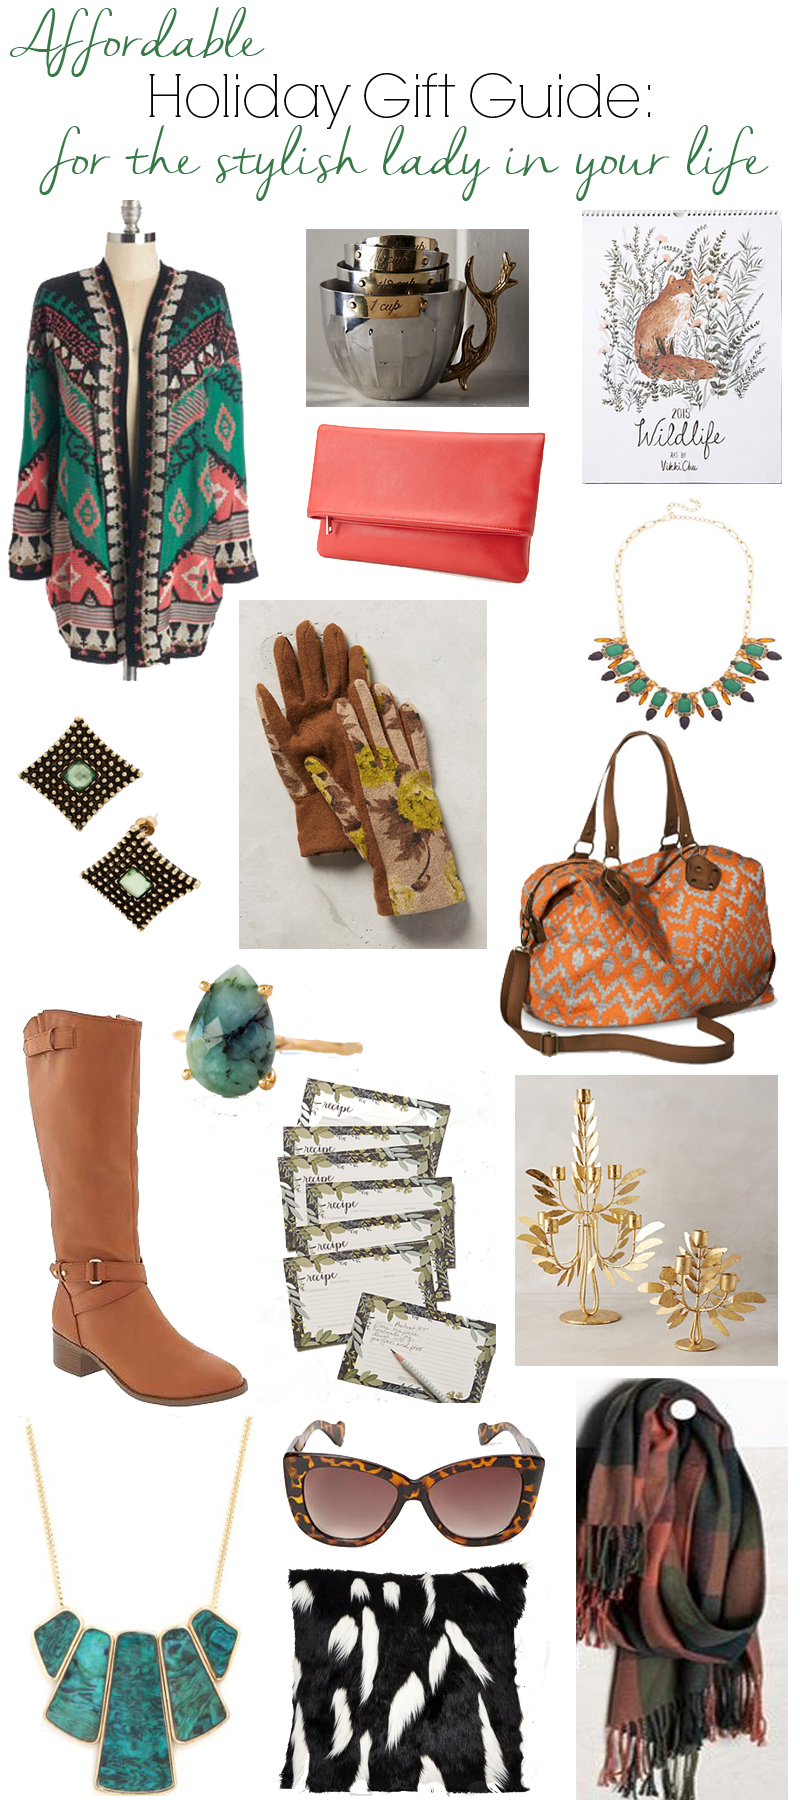 Affordable Holiday Gift Ideas for Ladies